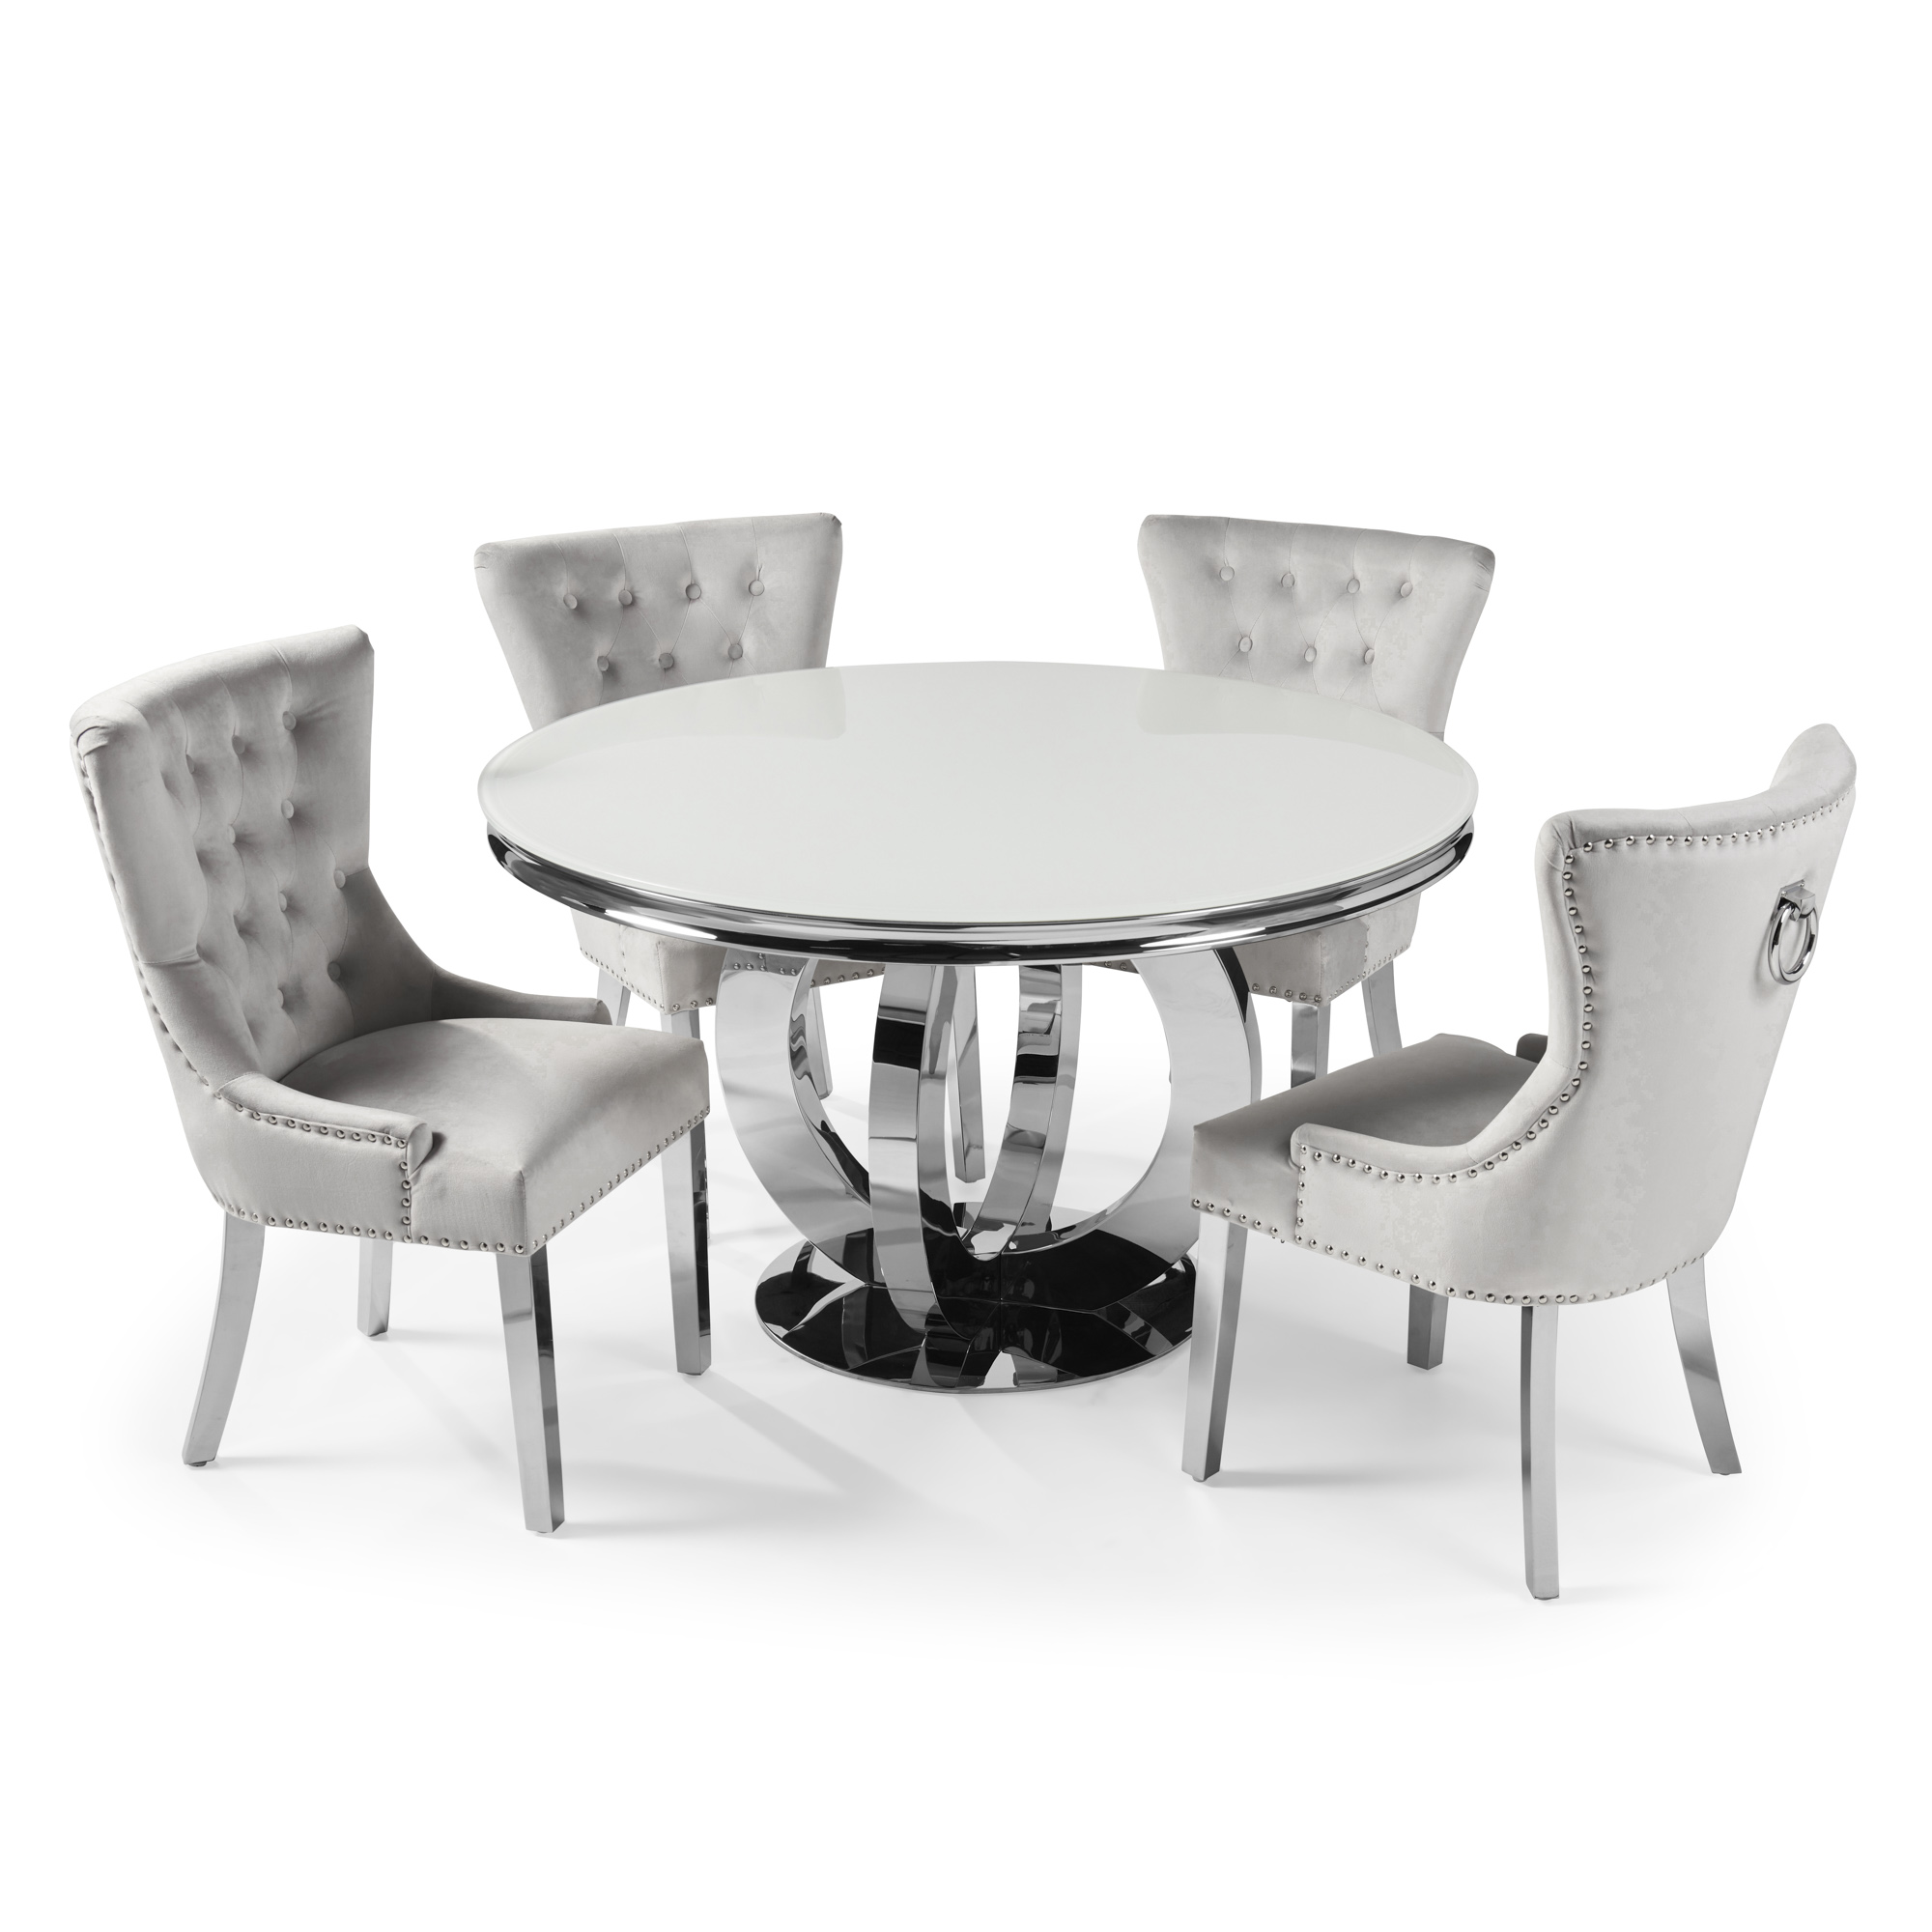 1.3m Circular Polished Steel Dining White Glass Table Set with 4 Wingback Dove Grey Brushed Velvet Dining Chairs